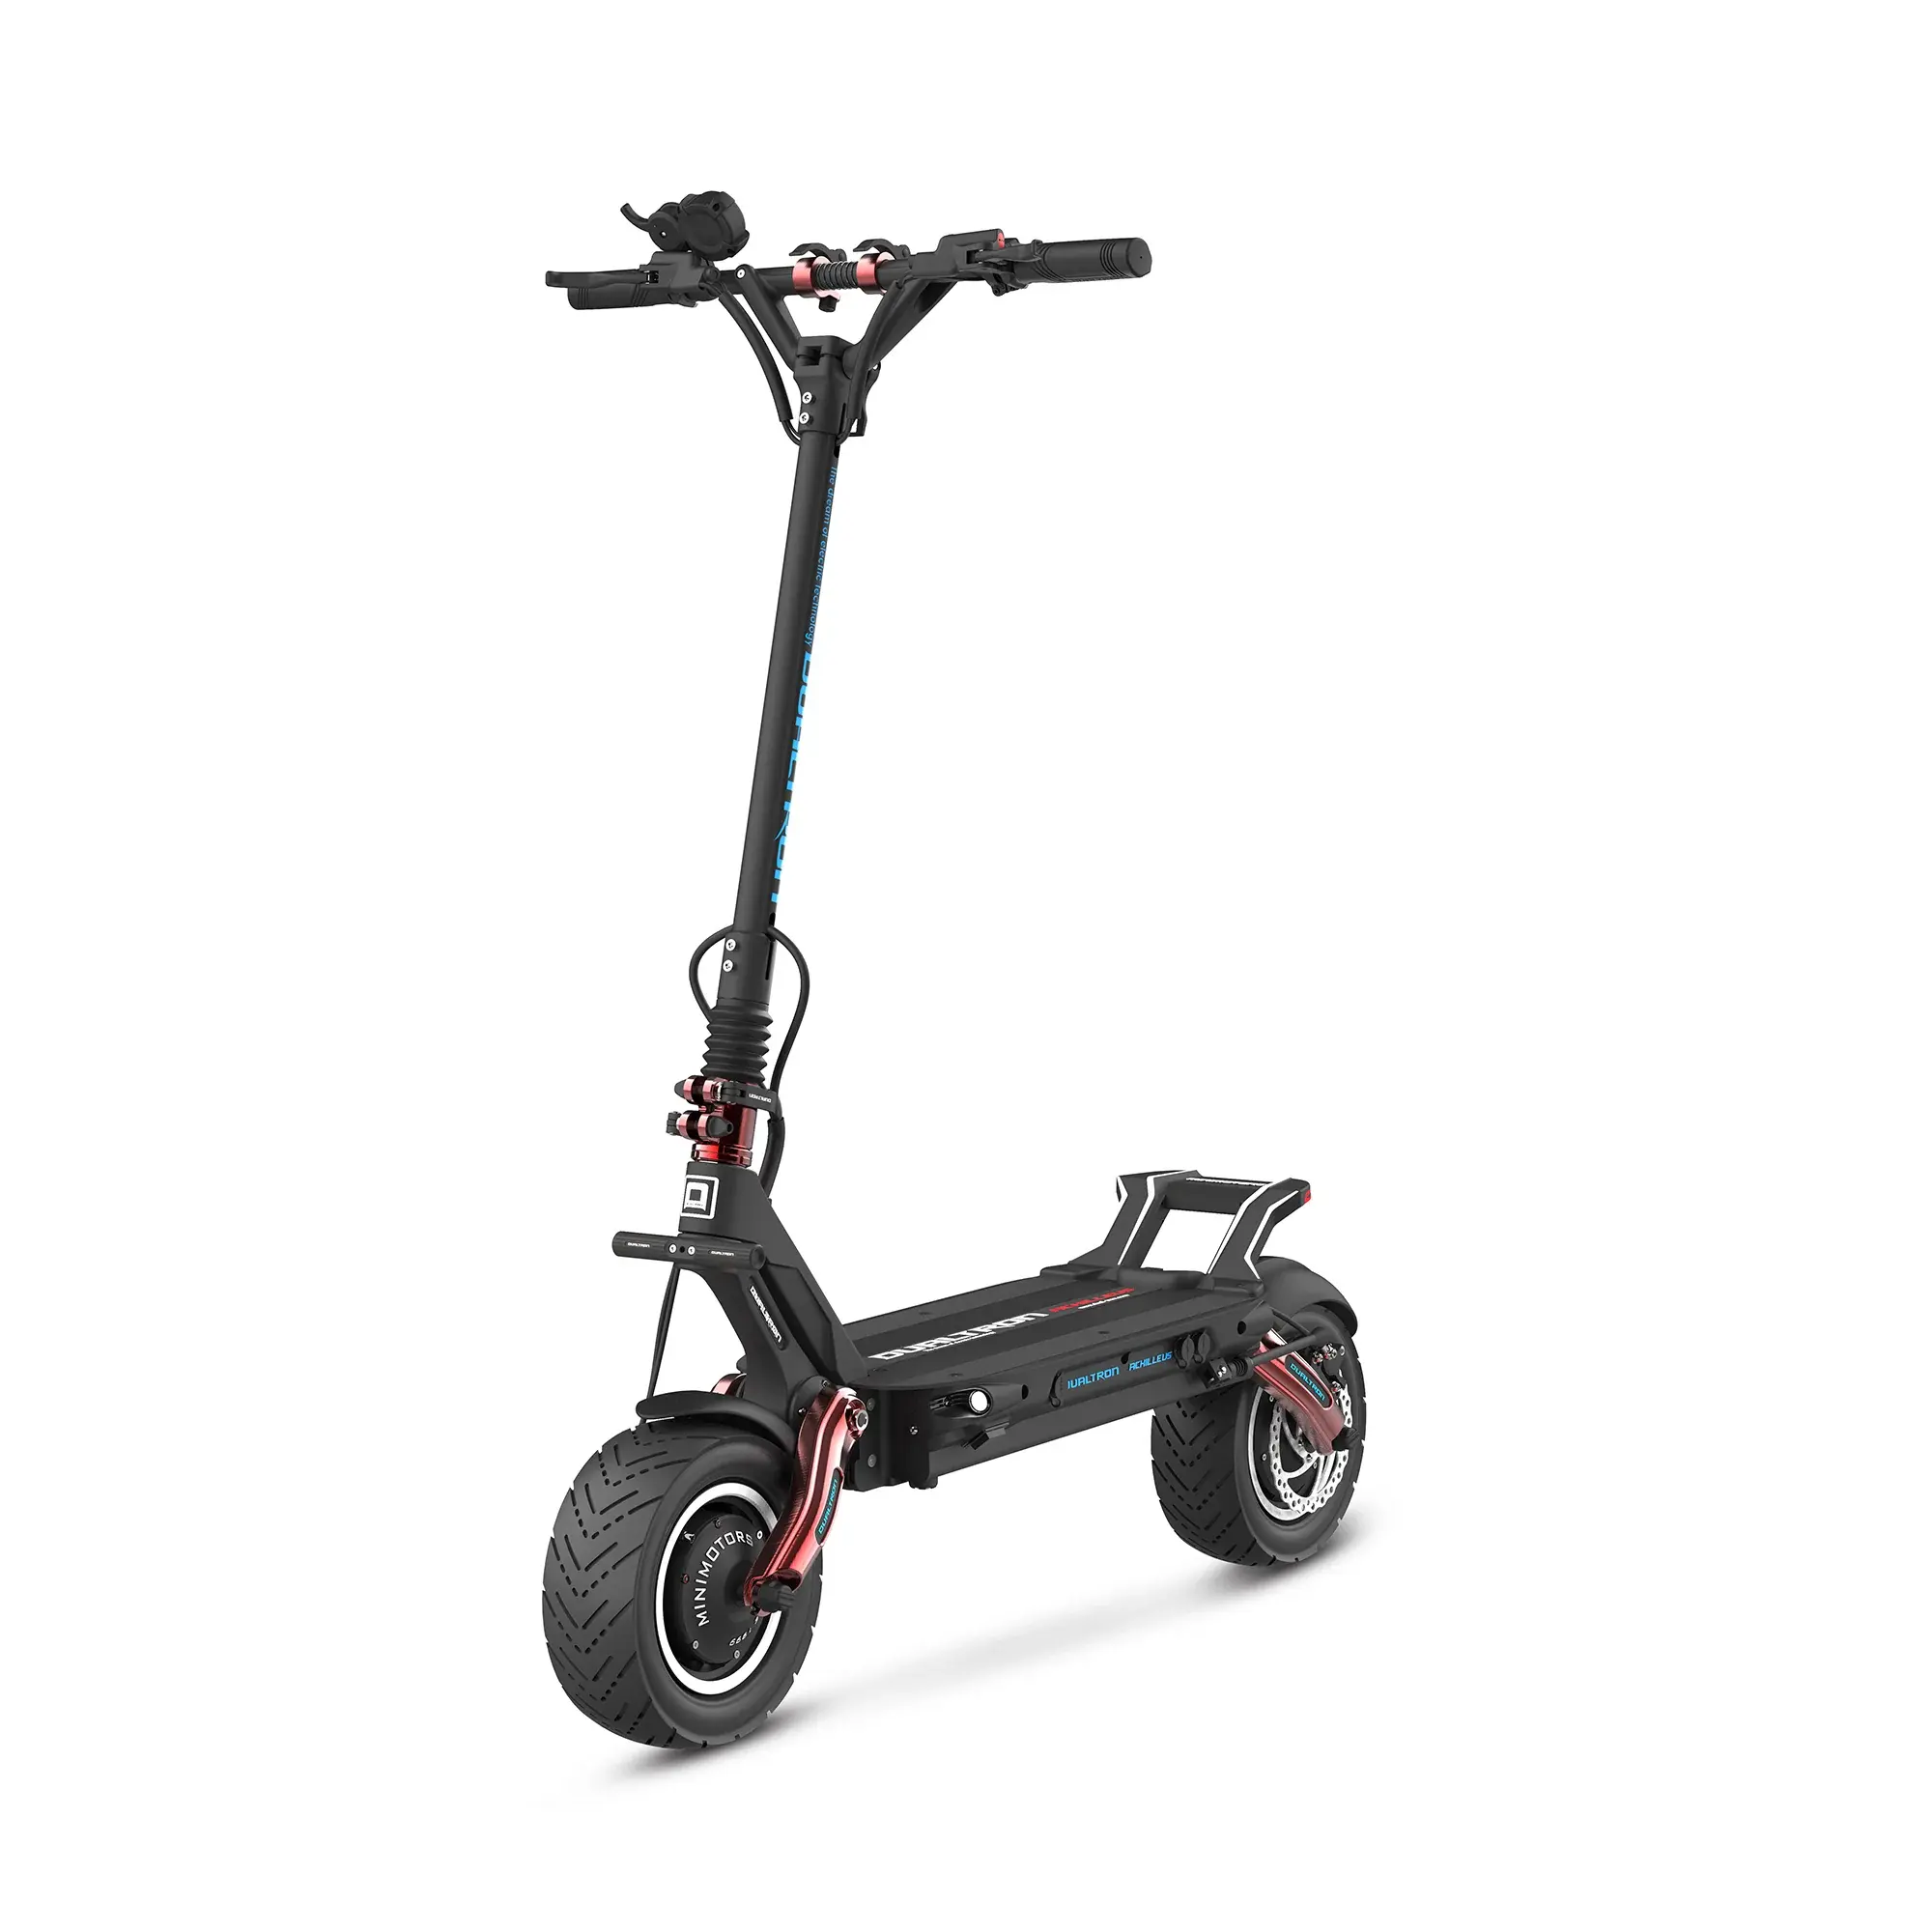 Best Price 60v 28ah dual tron dual motor powerful fast scooter 4648W dualtron achilleus electric scooter for adults